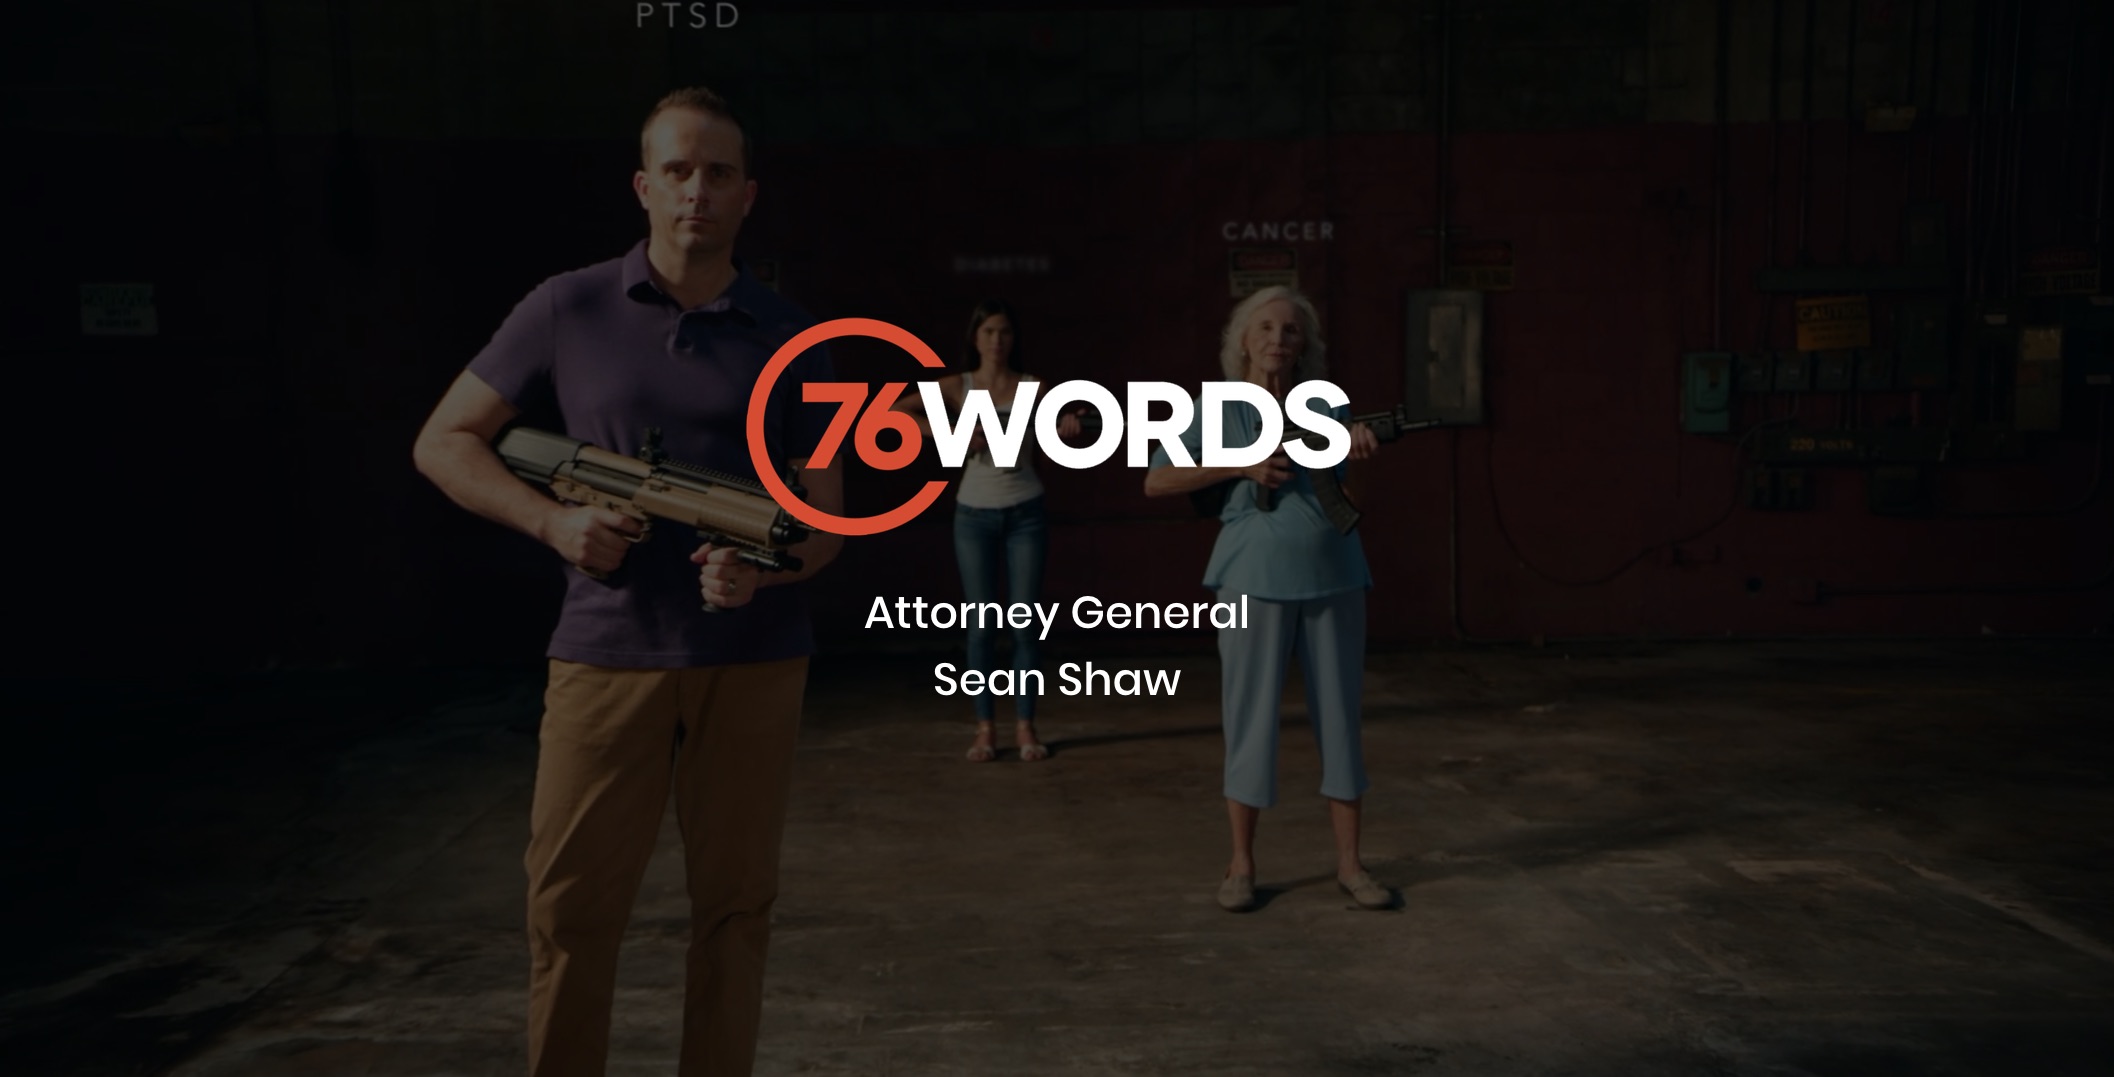 IU C&I Studios Page White and orange 76 Words Attorney General Sean Shaw logo with a dimmed background of a young woman, an elderly woman and a man posing for the camera holding assault weapons in a studio